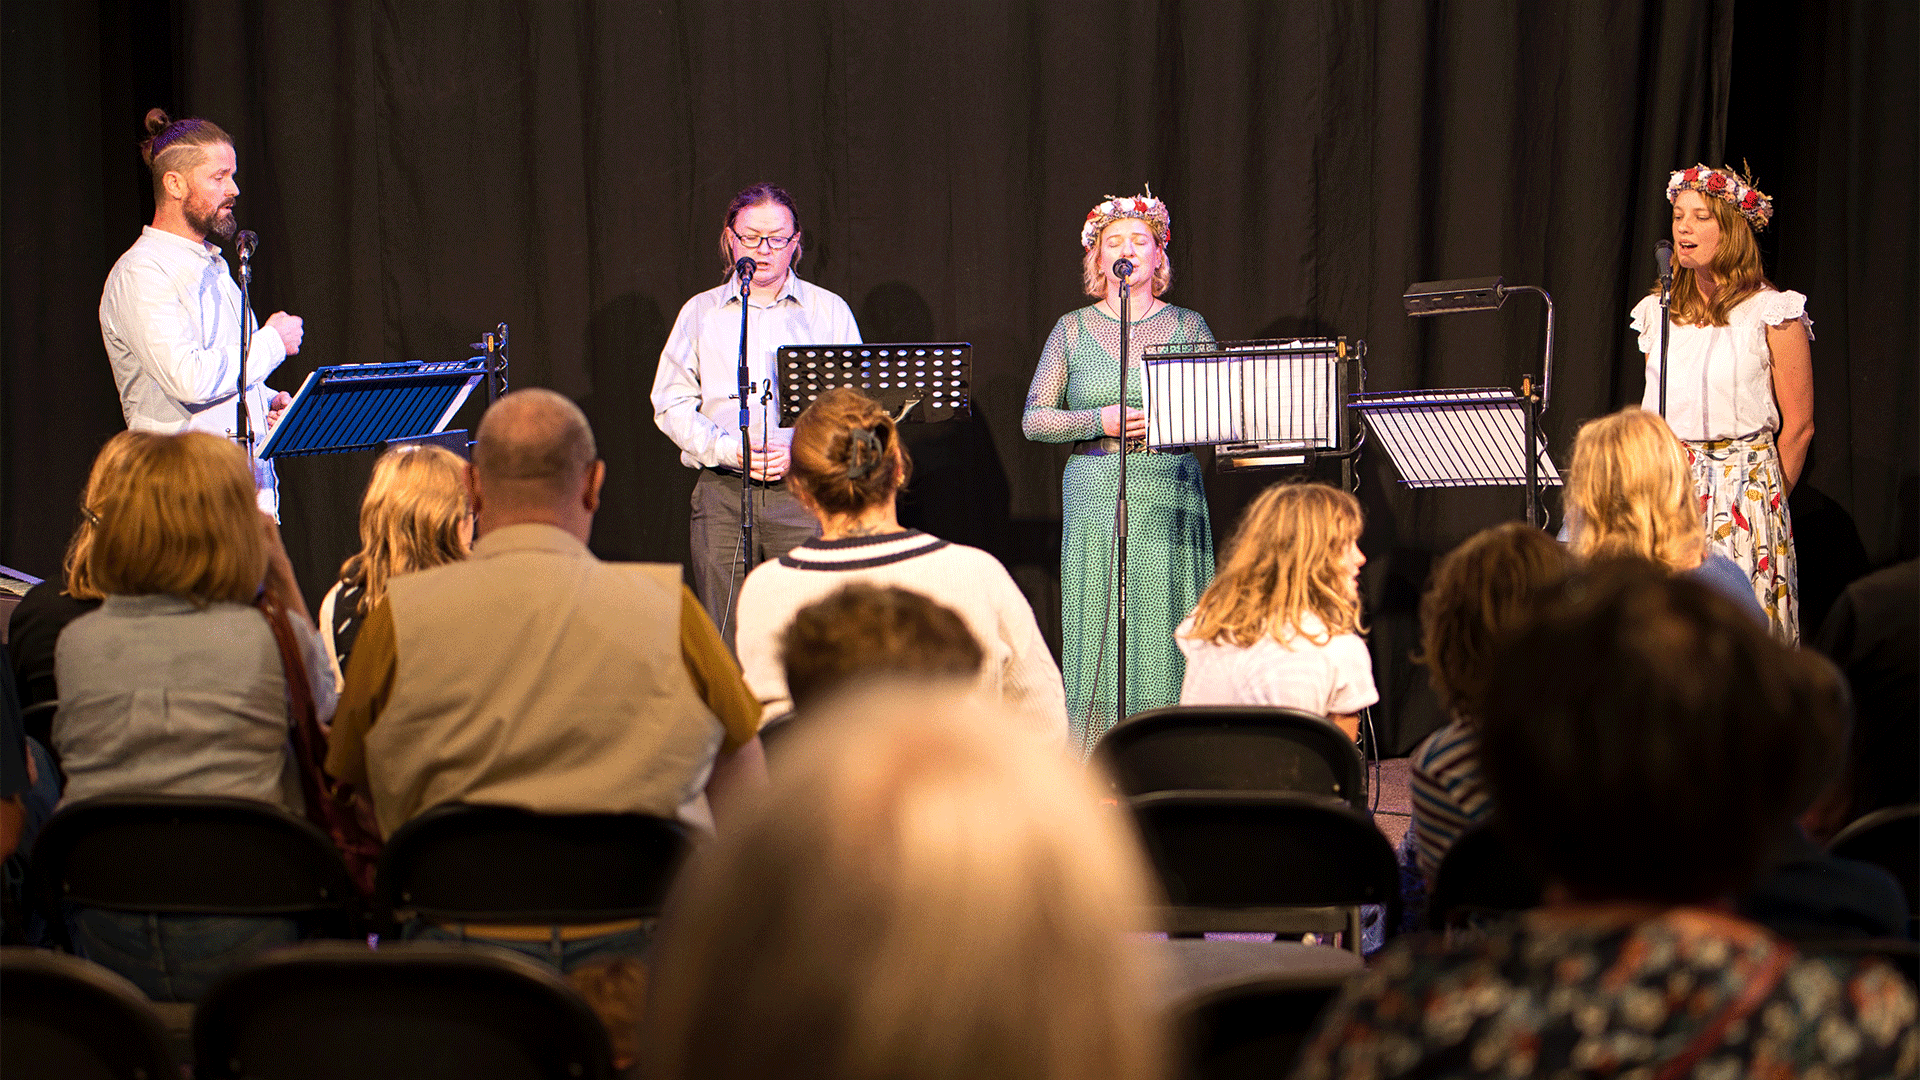 Four members of Polish choir TAK sing in front of an audience.